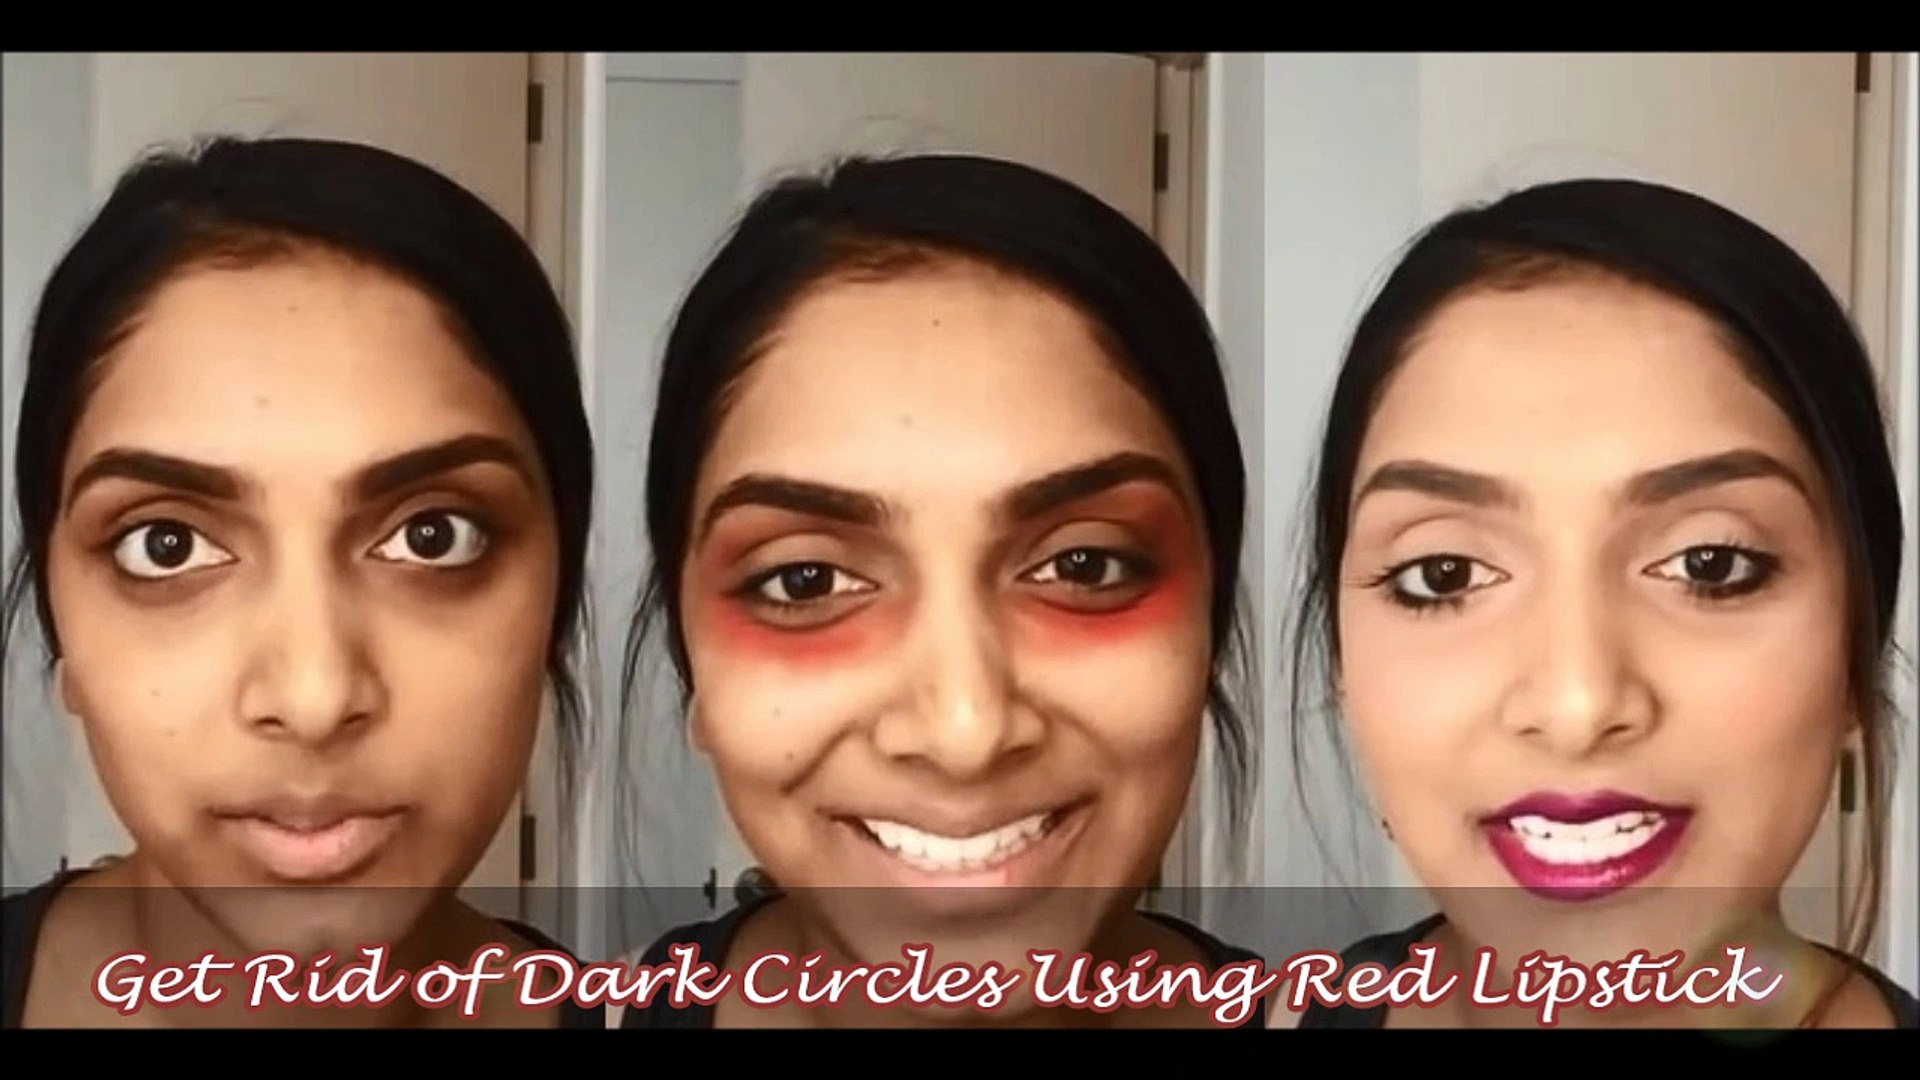 Hide Dark Circles Using Red Lipstick by Deepicam - video Dailymotion